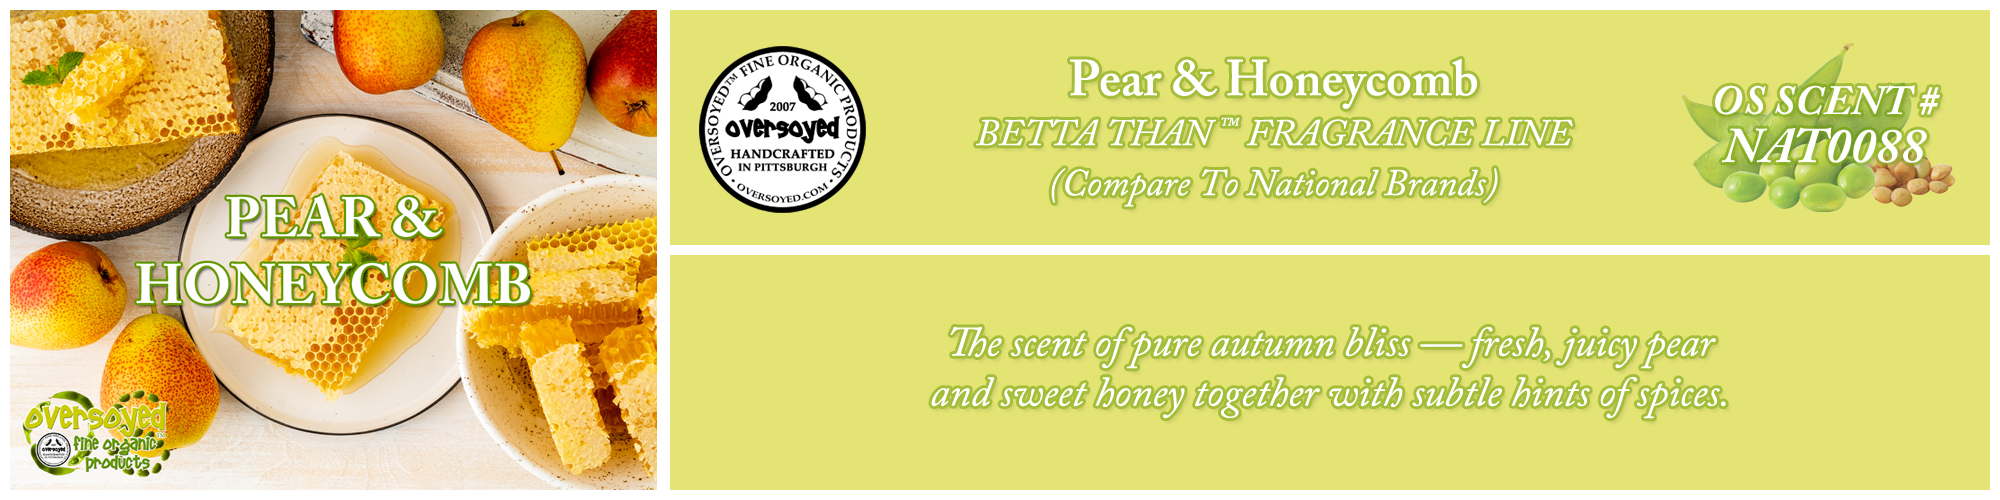 Pear & Honeycomb Handcrafted Products Collection